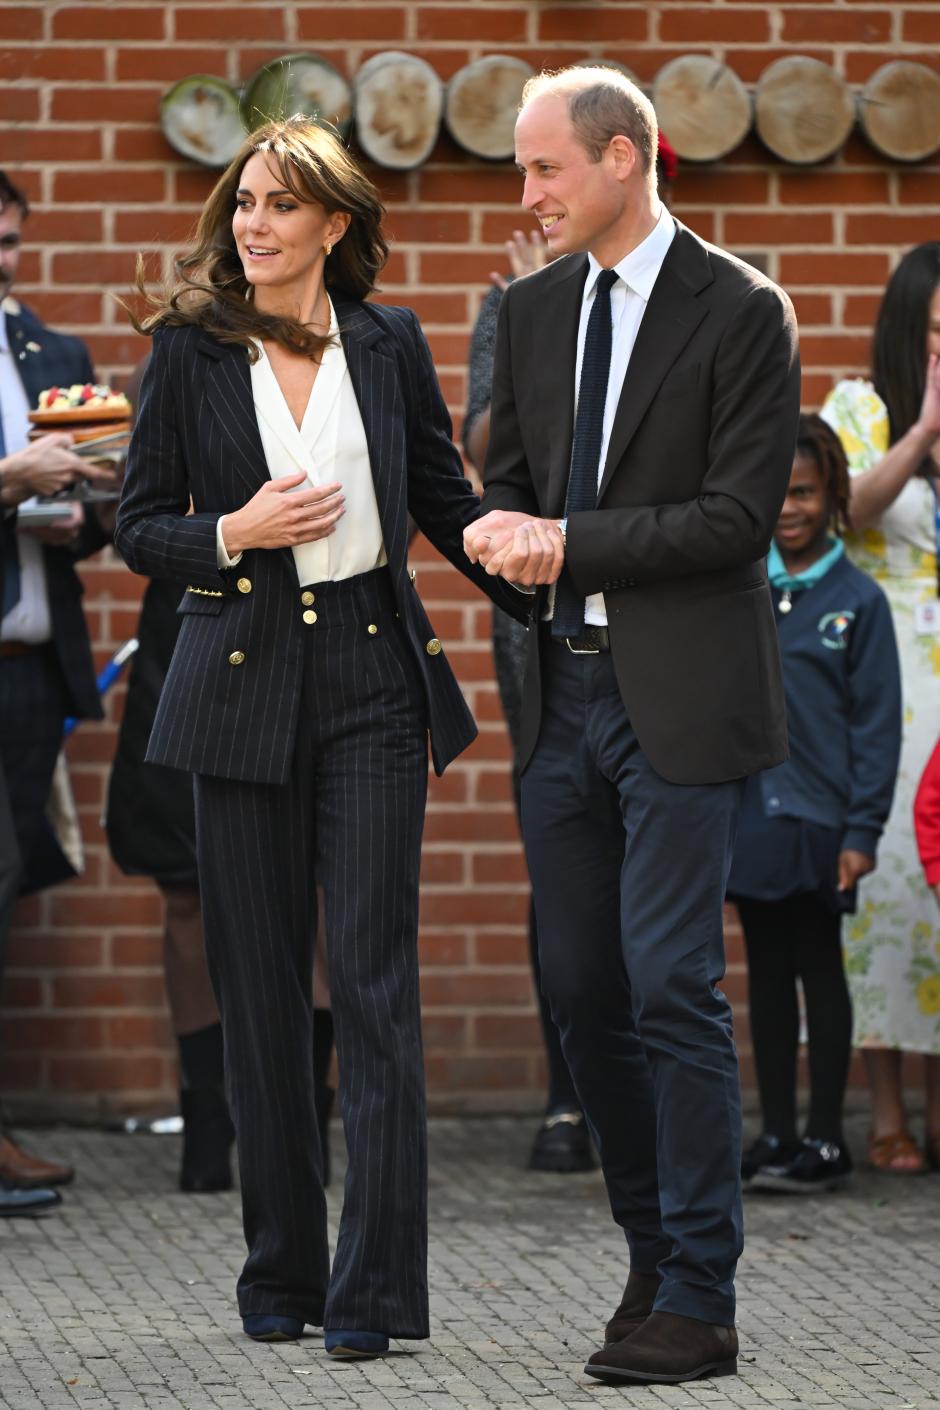 Prince William and Kate Middleton , Princess of Wales during a visit the Grange Pavilion To celebrate the 75th anniversary of the arrival of the HMT Empire Windrush , Cardiff, Wales, UK - 03 Oct 2023